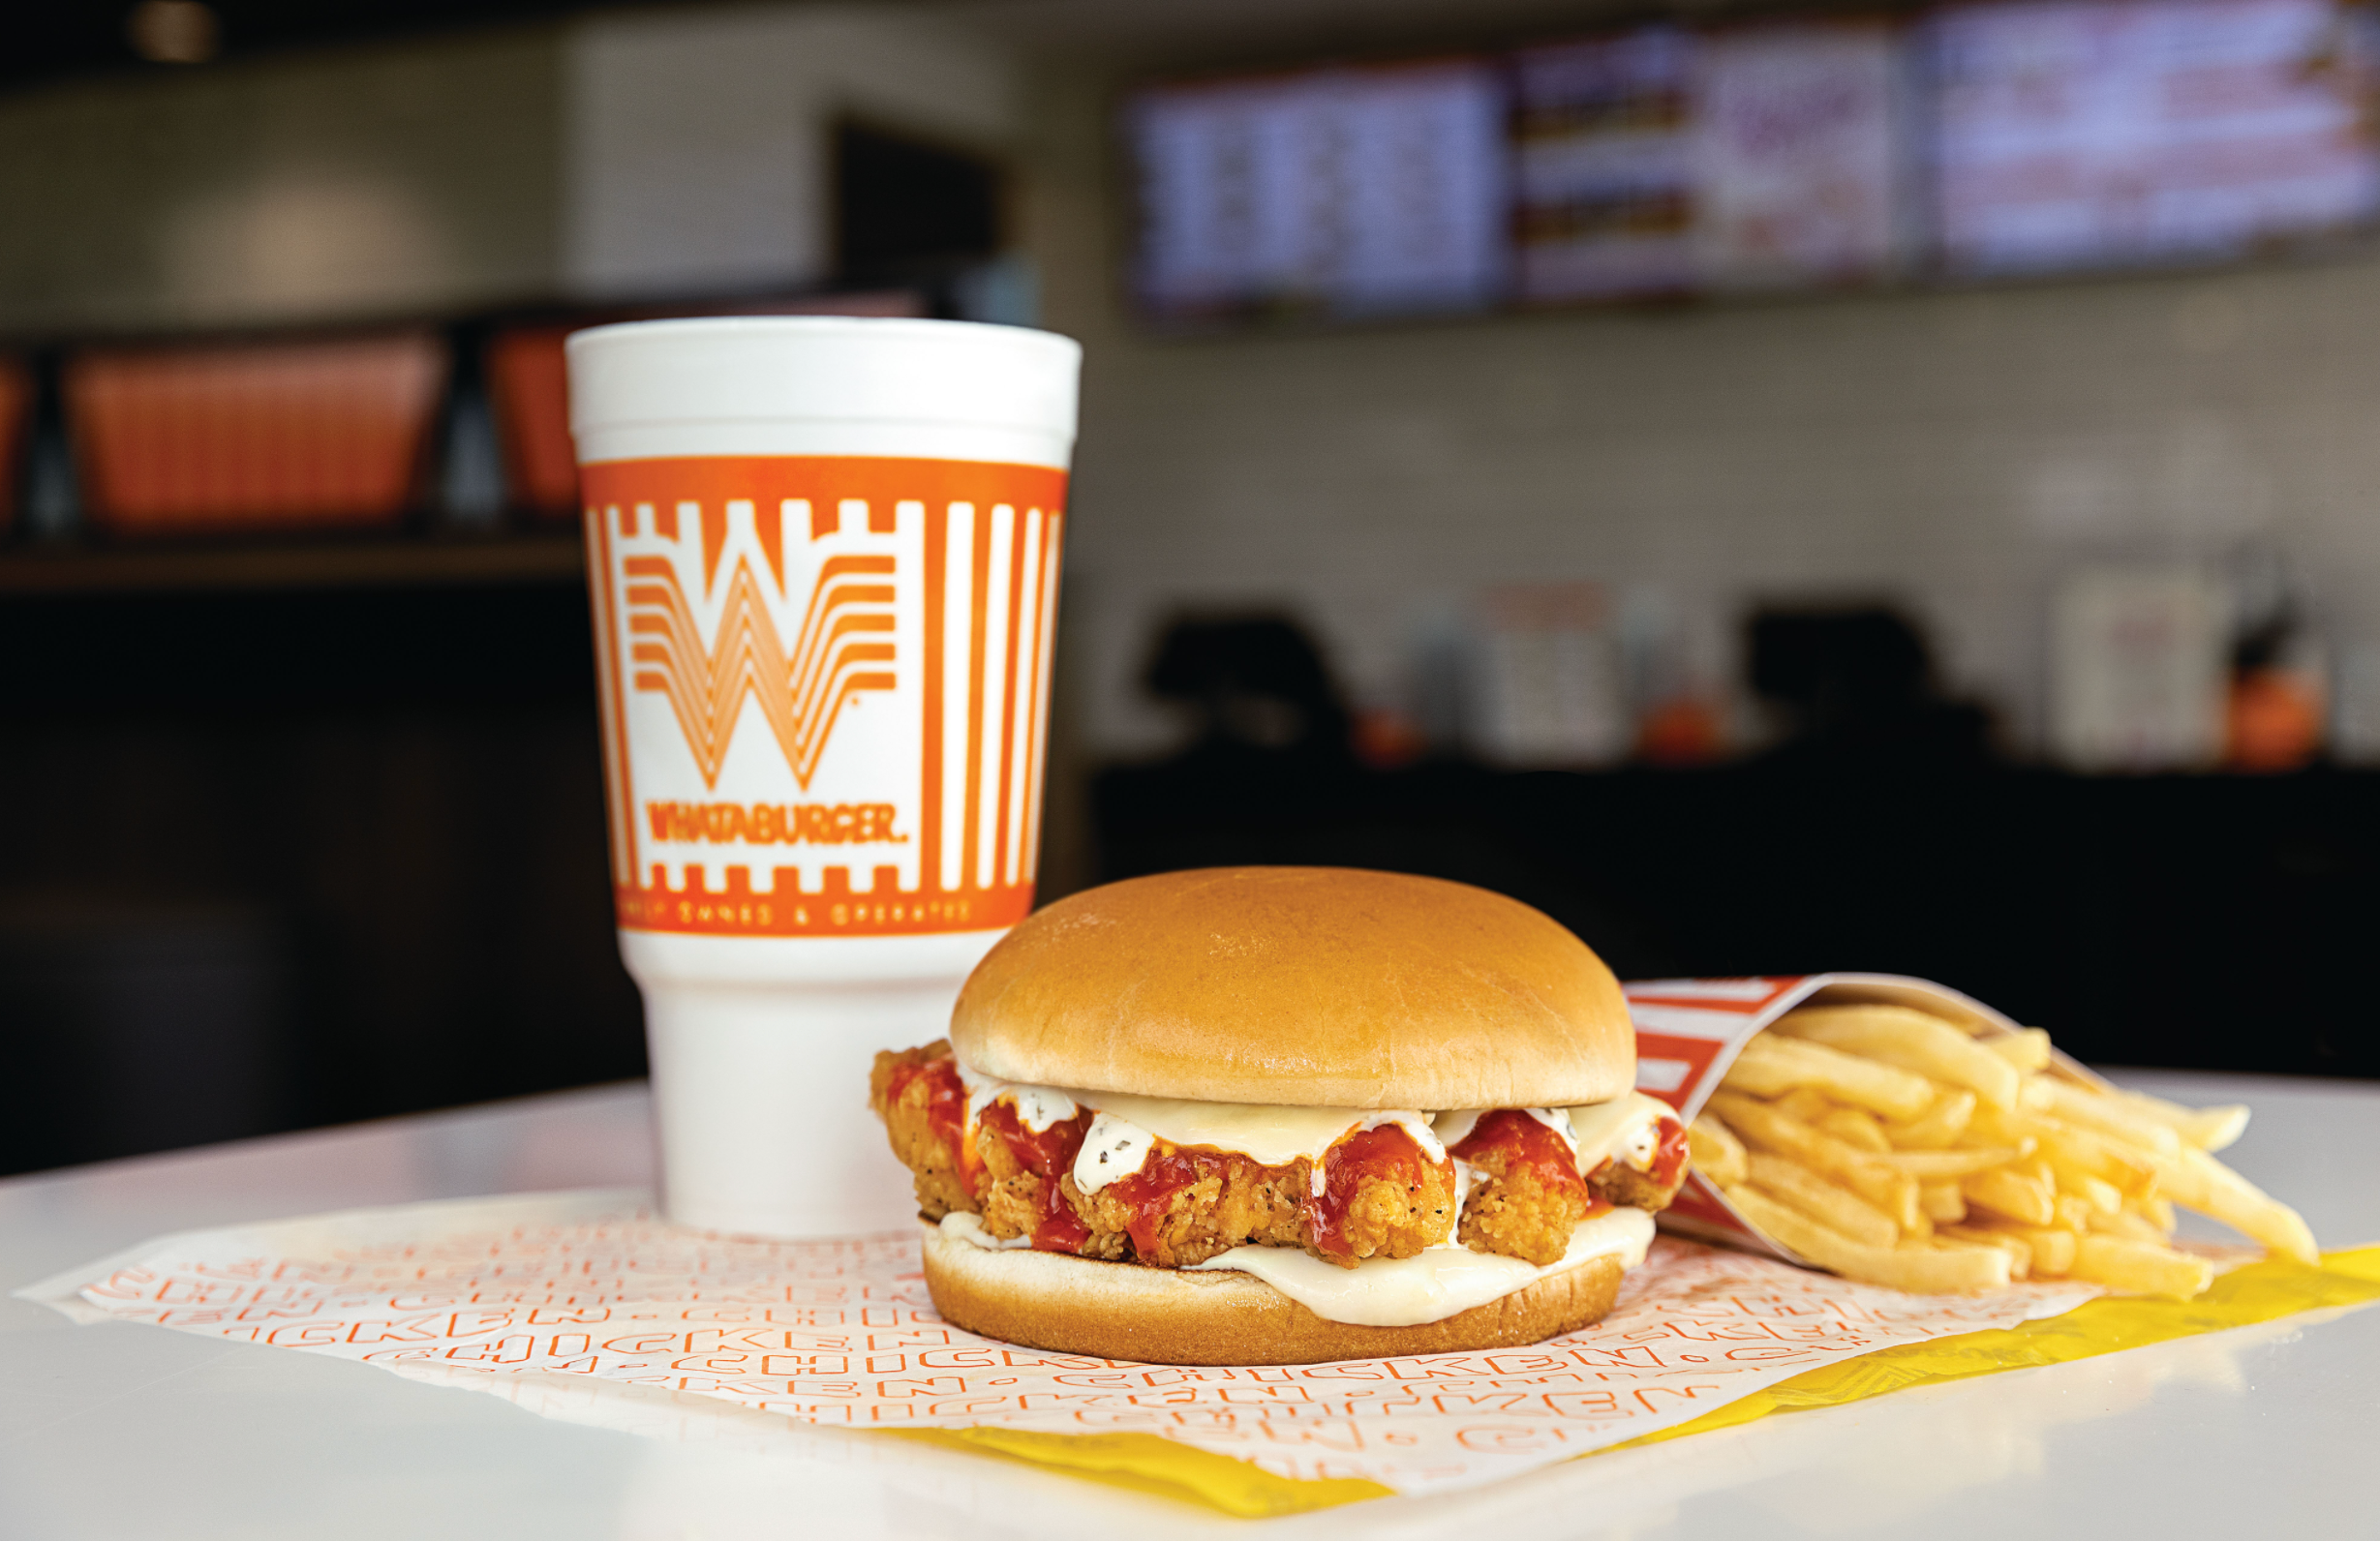 Whataburger - Spicy Ketchup is back! Come try Fancy's wild side.